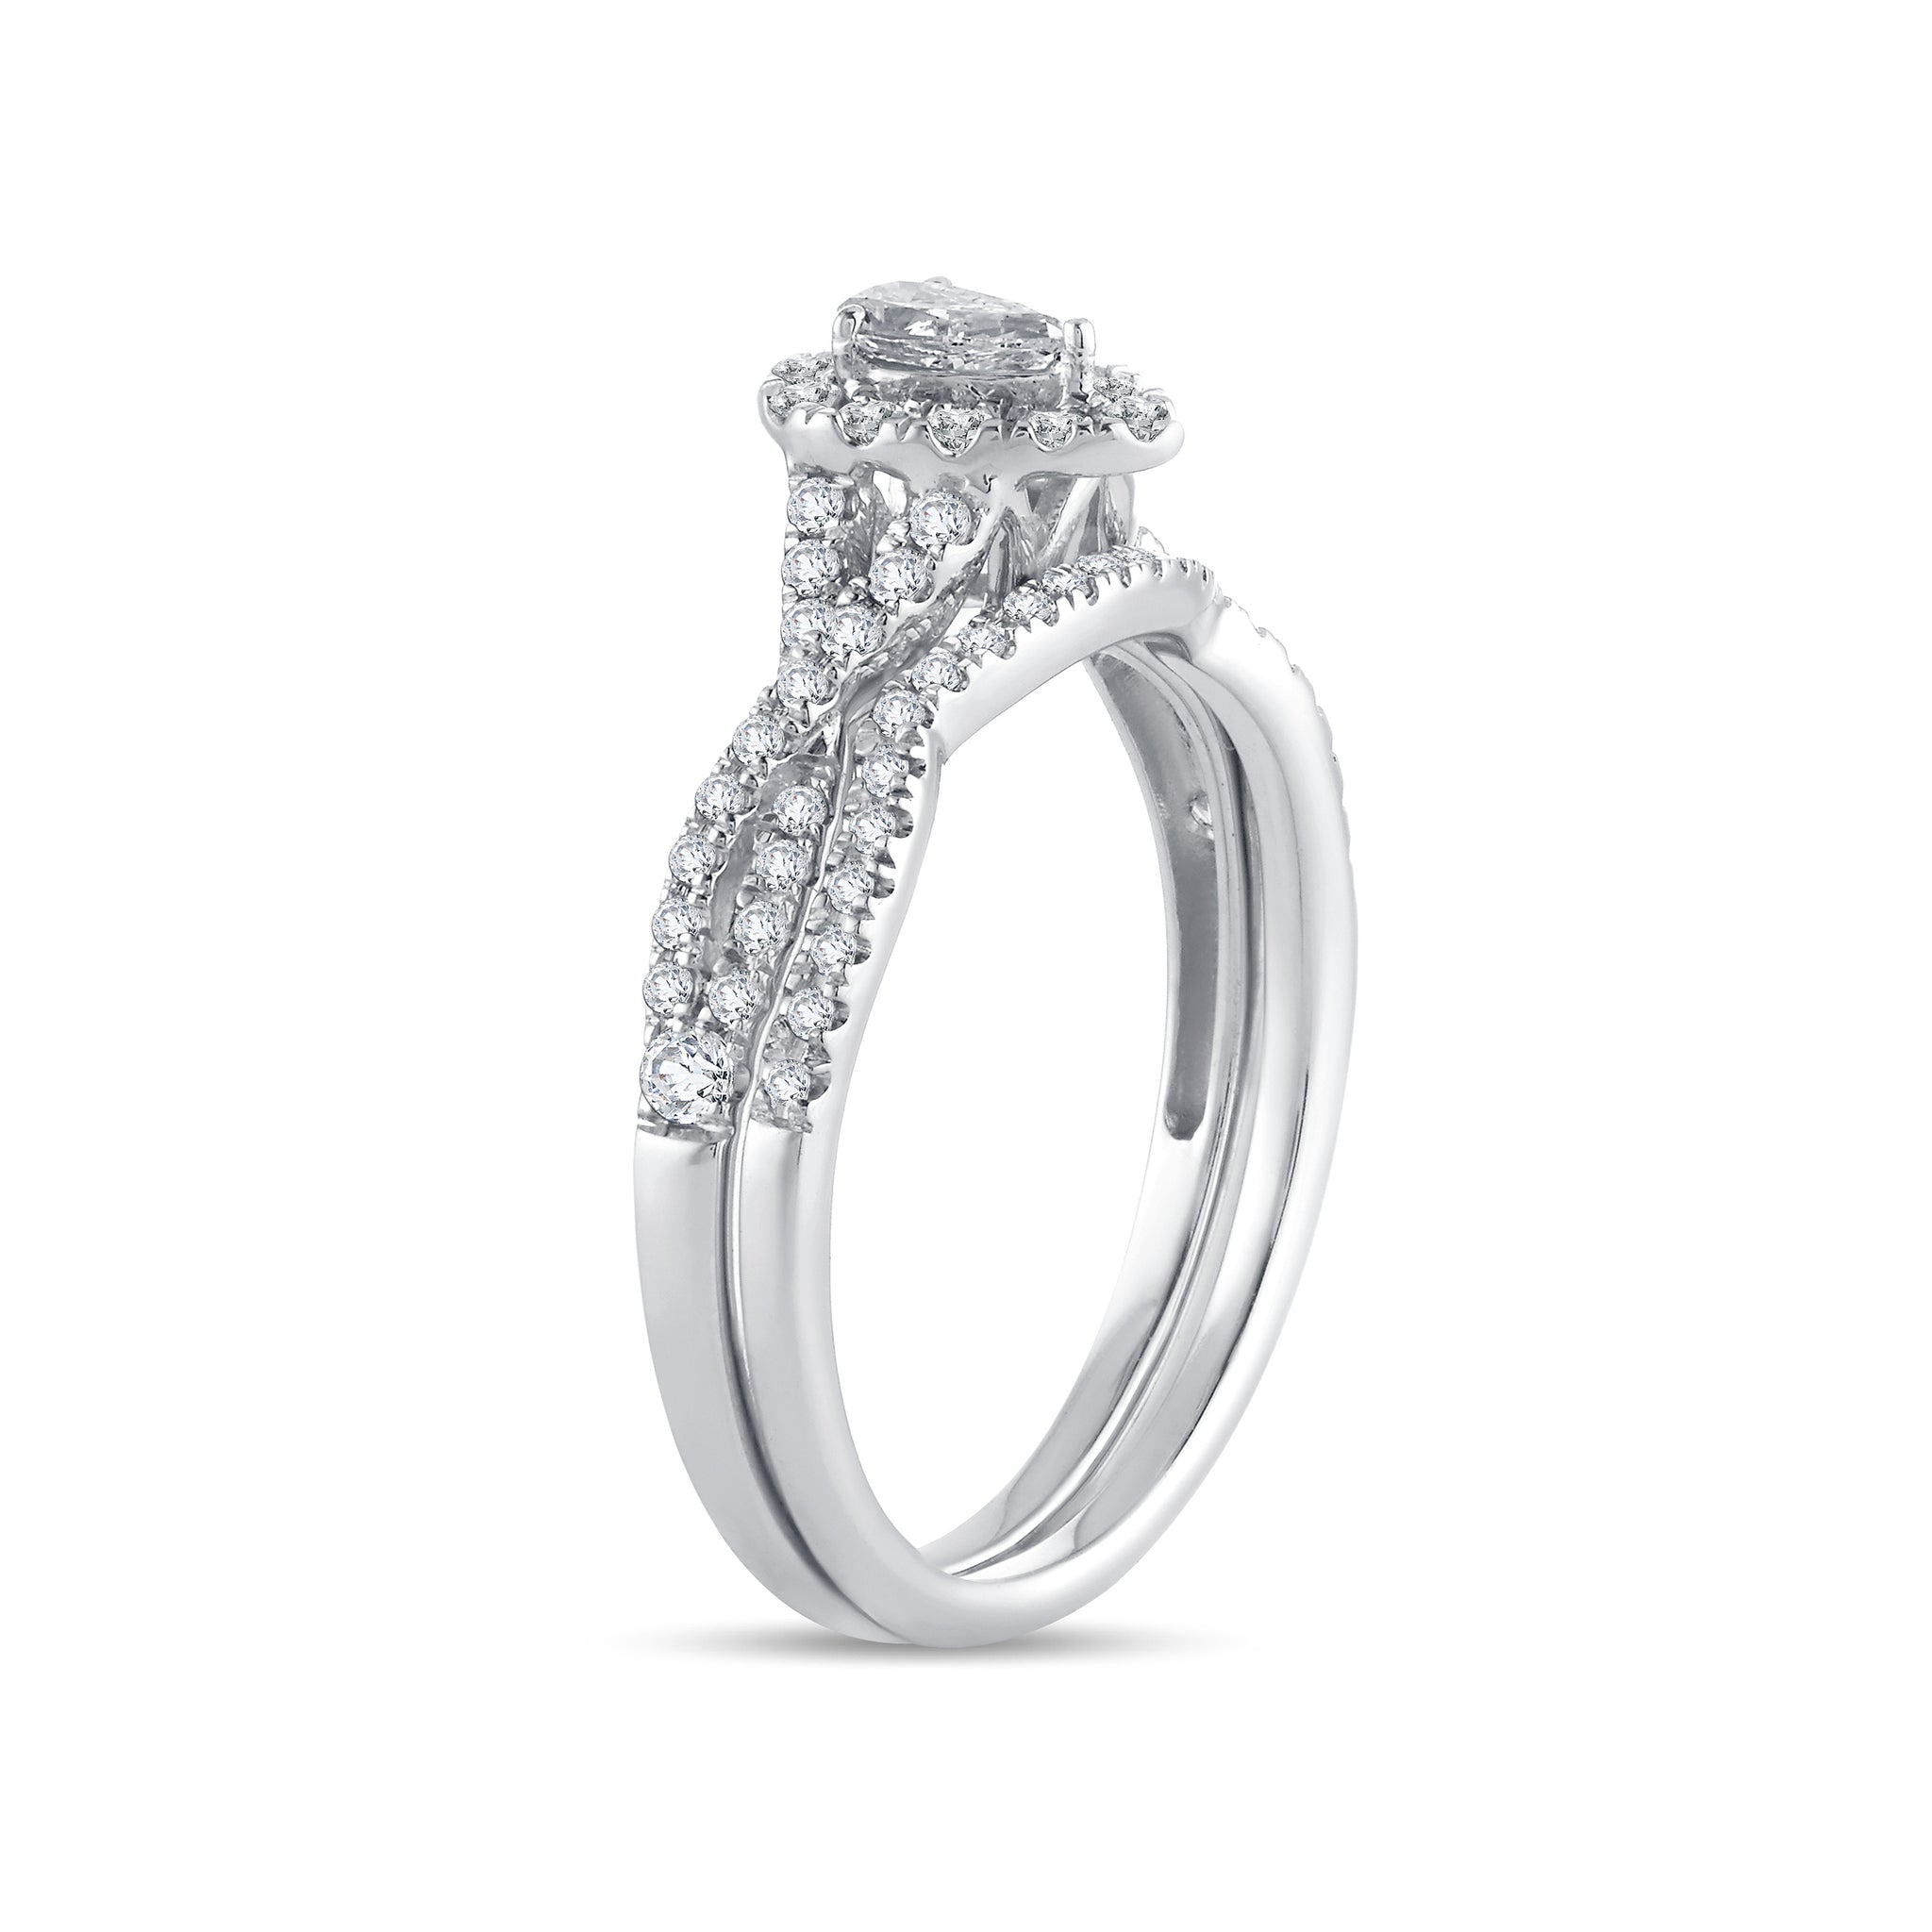 Diamond Engagement Ring with Band 0.51 Carats 14KT White Gold